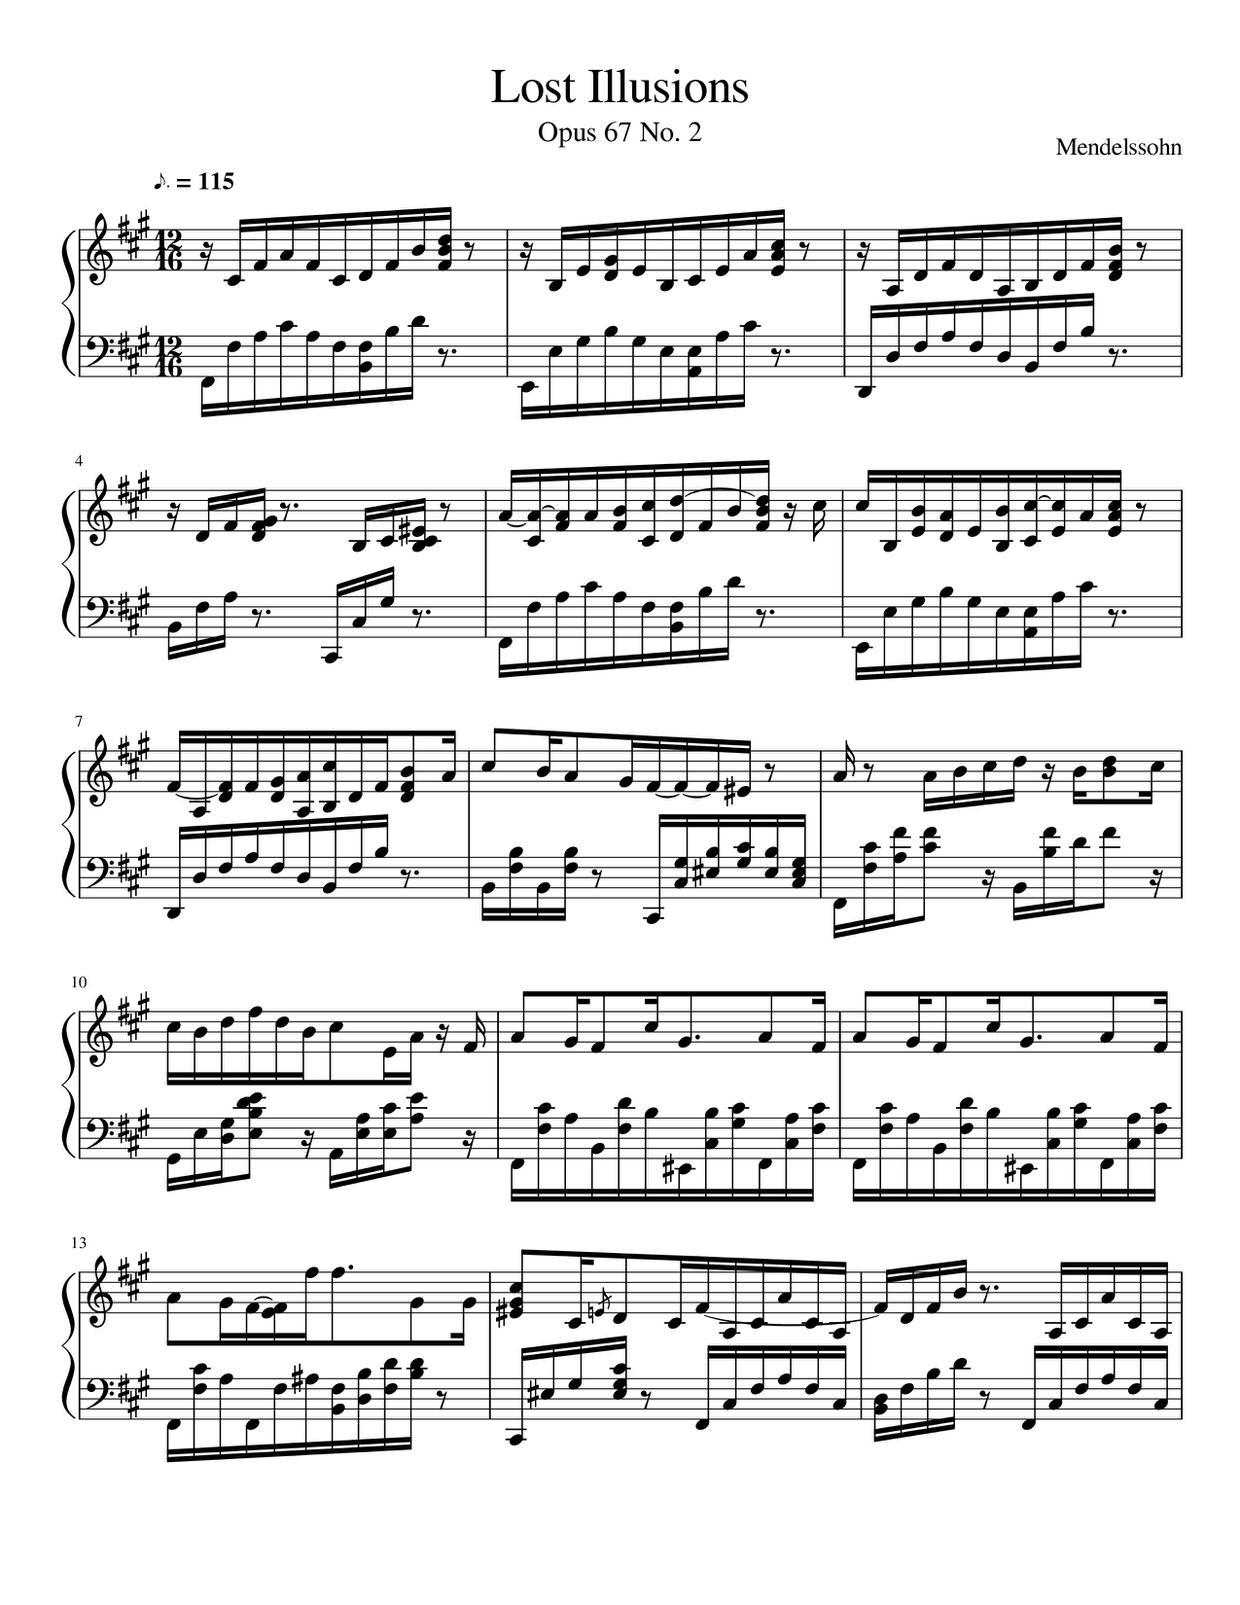 Songs Without Words, Book VI Opus 67: No. 2 in F-Sharp Minor Score